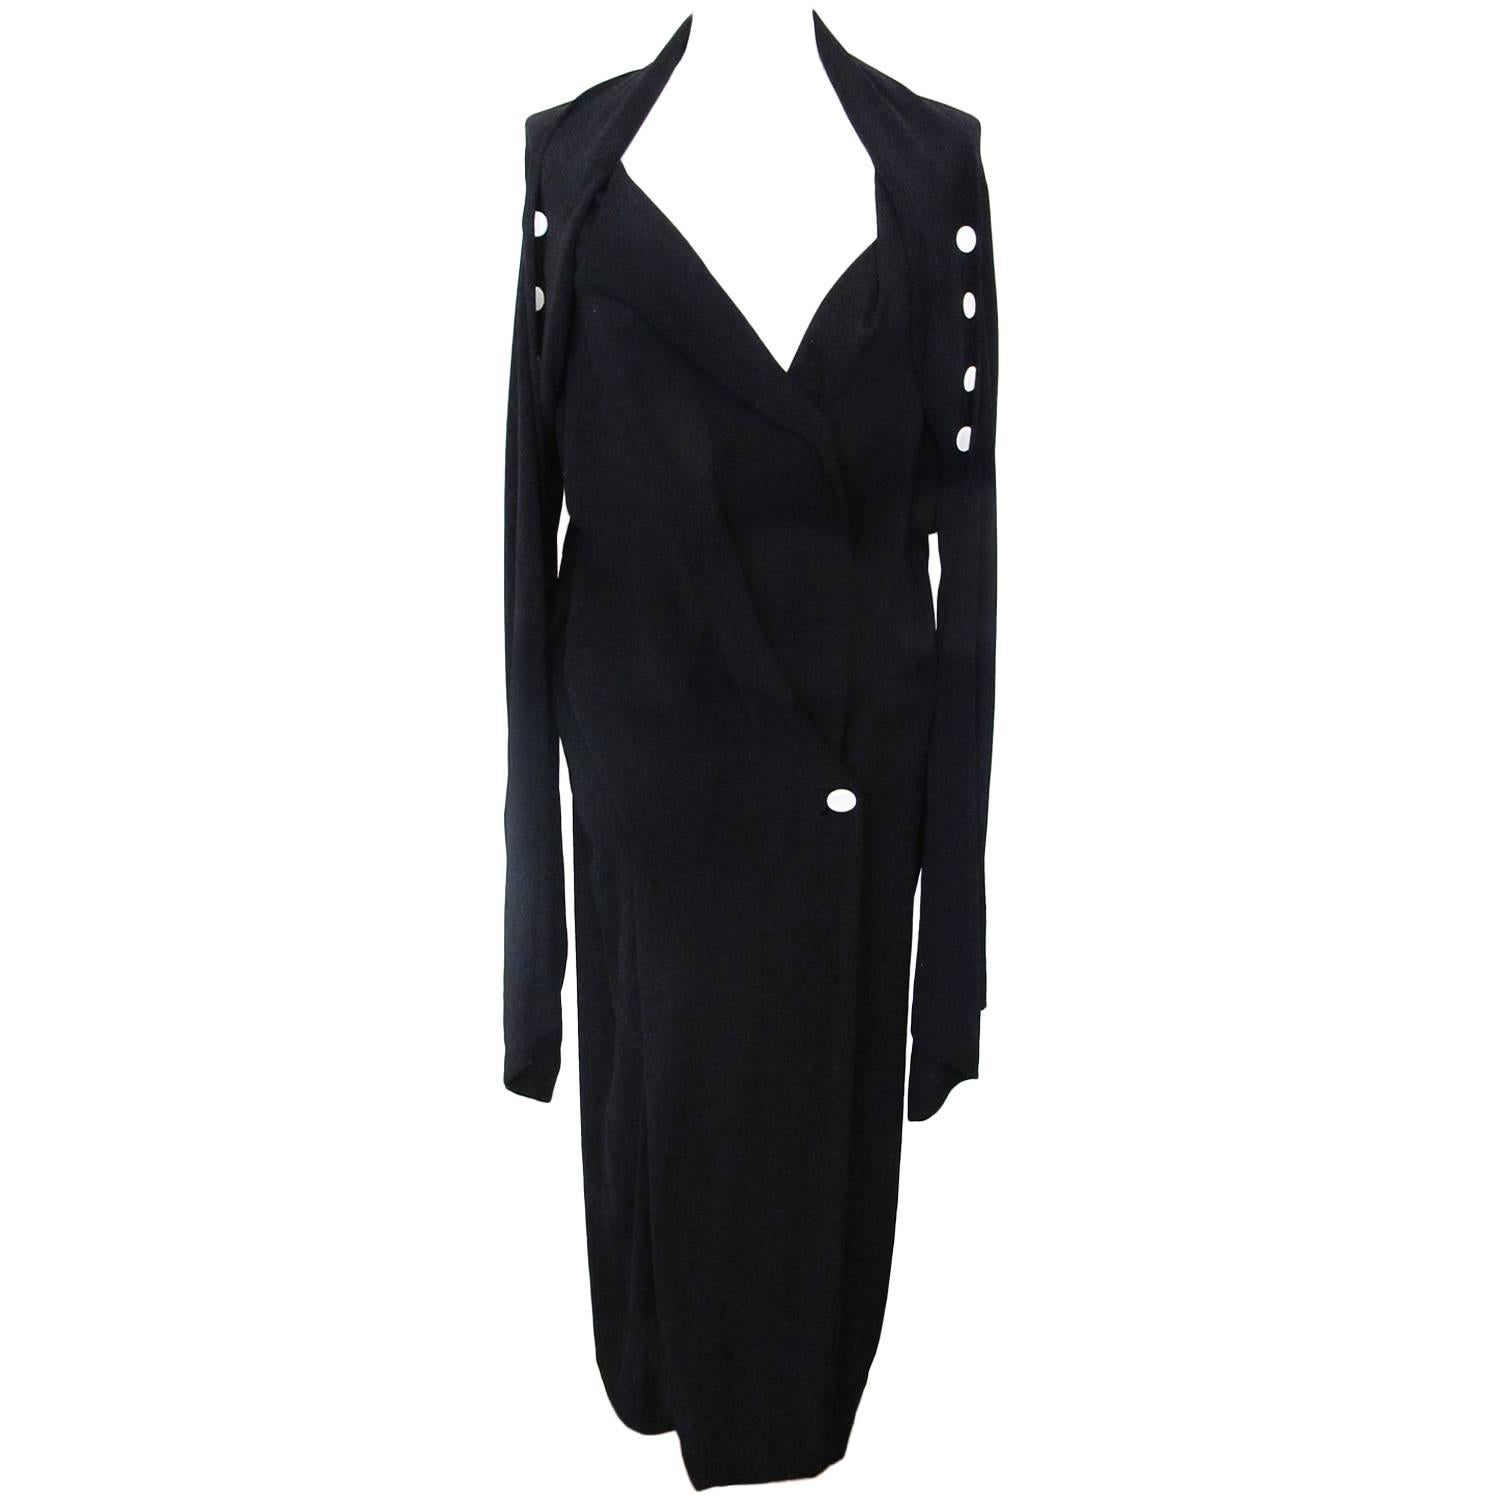 Yohji Yamamoto Long-Sleeved Black Dress with White Button Detail For Sale